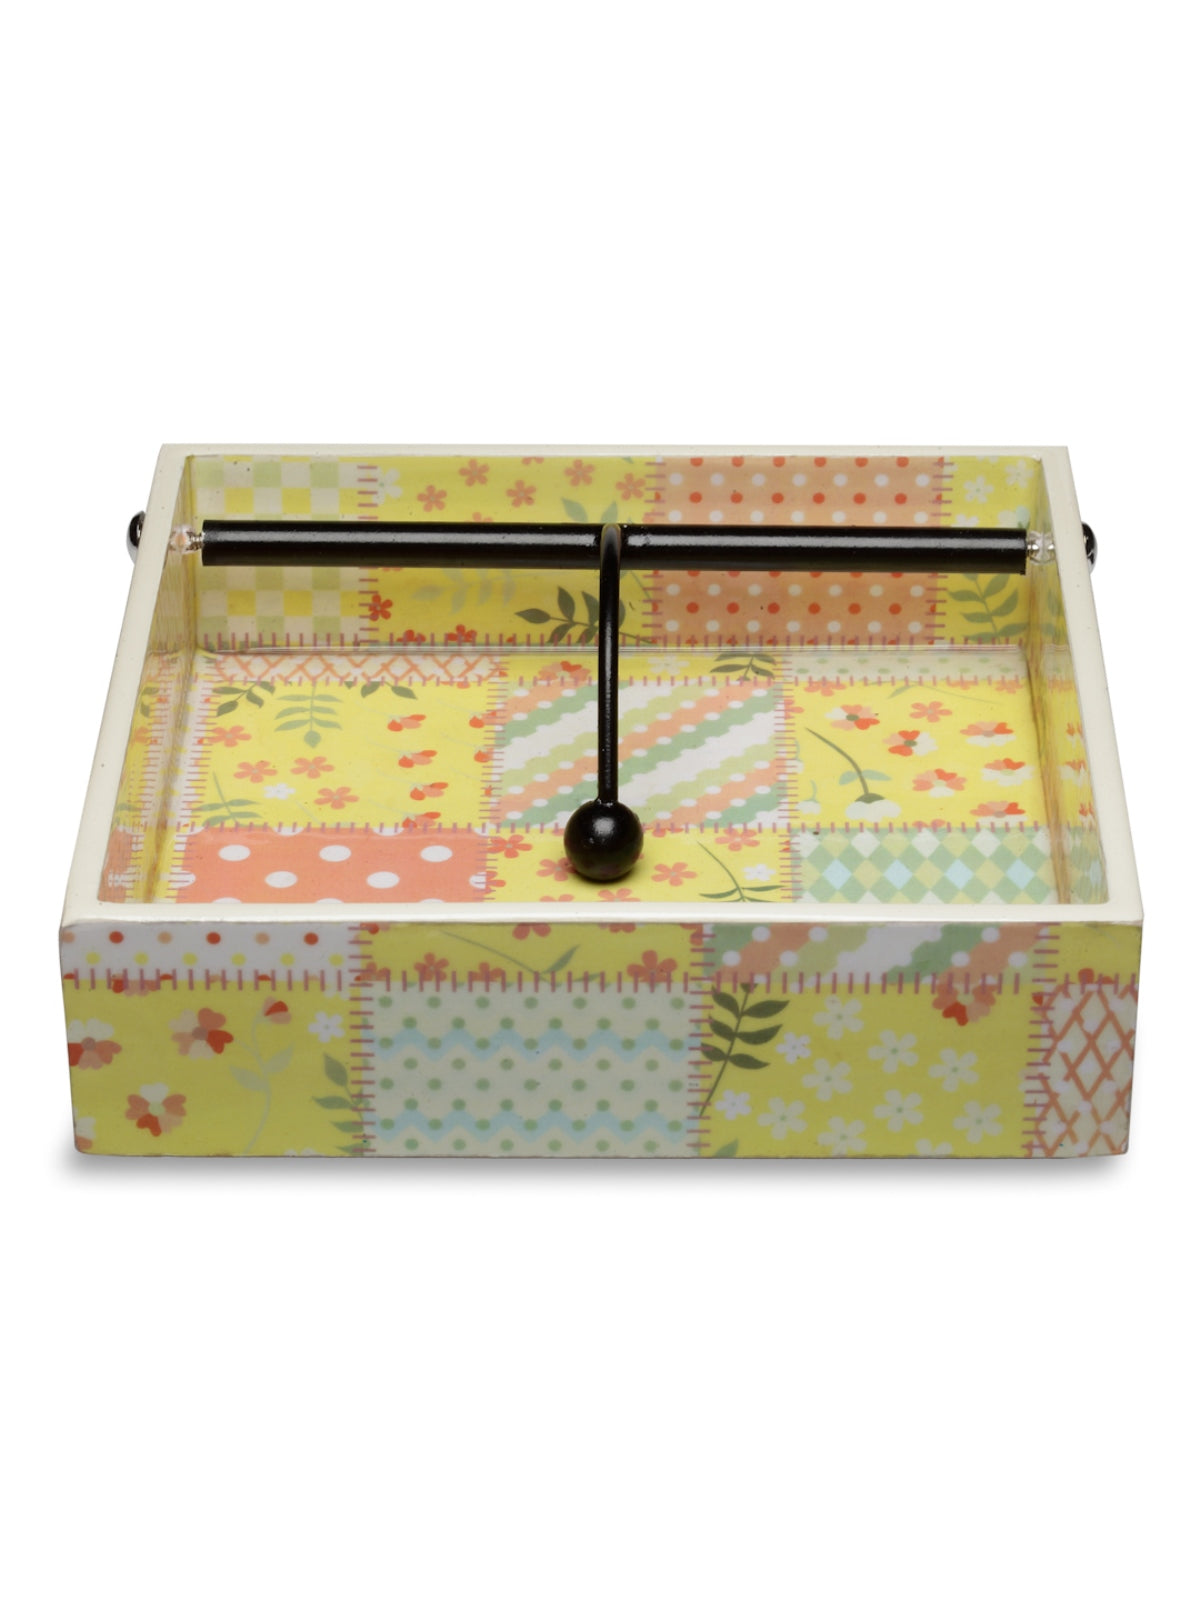 Yellow & Peach Floral Patterned Wooden Tissue Square Tray